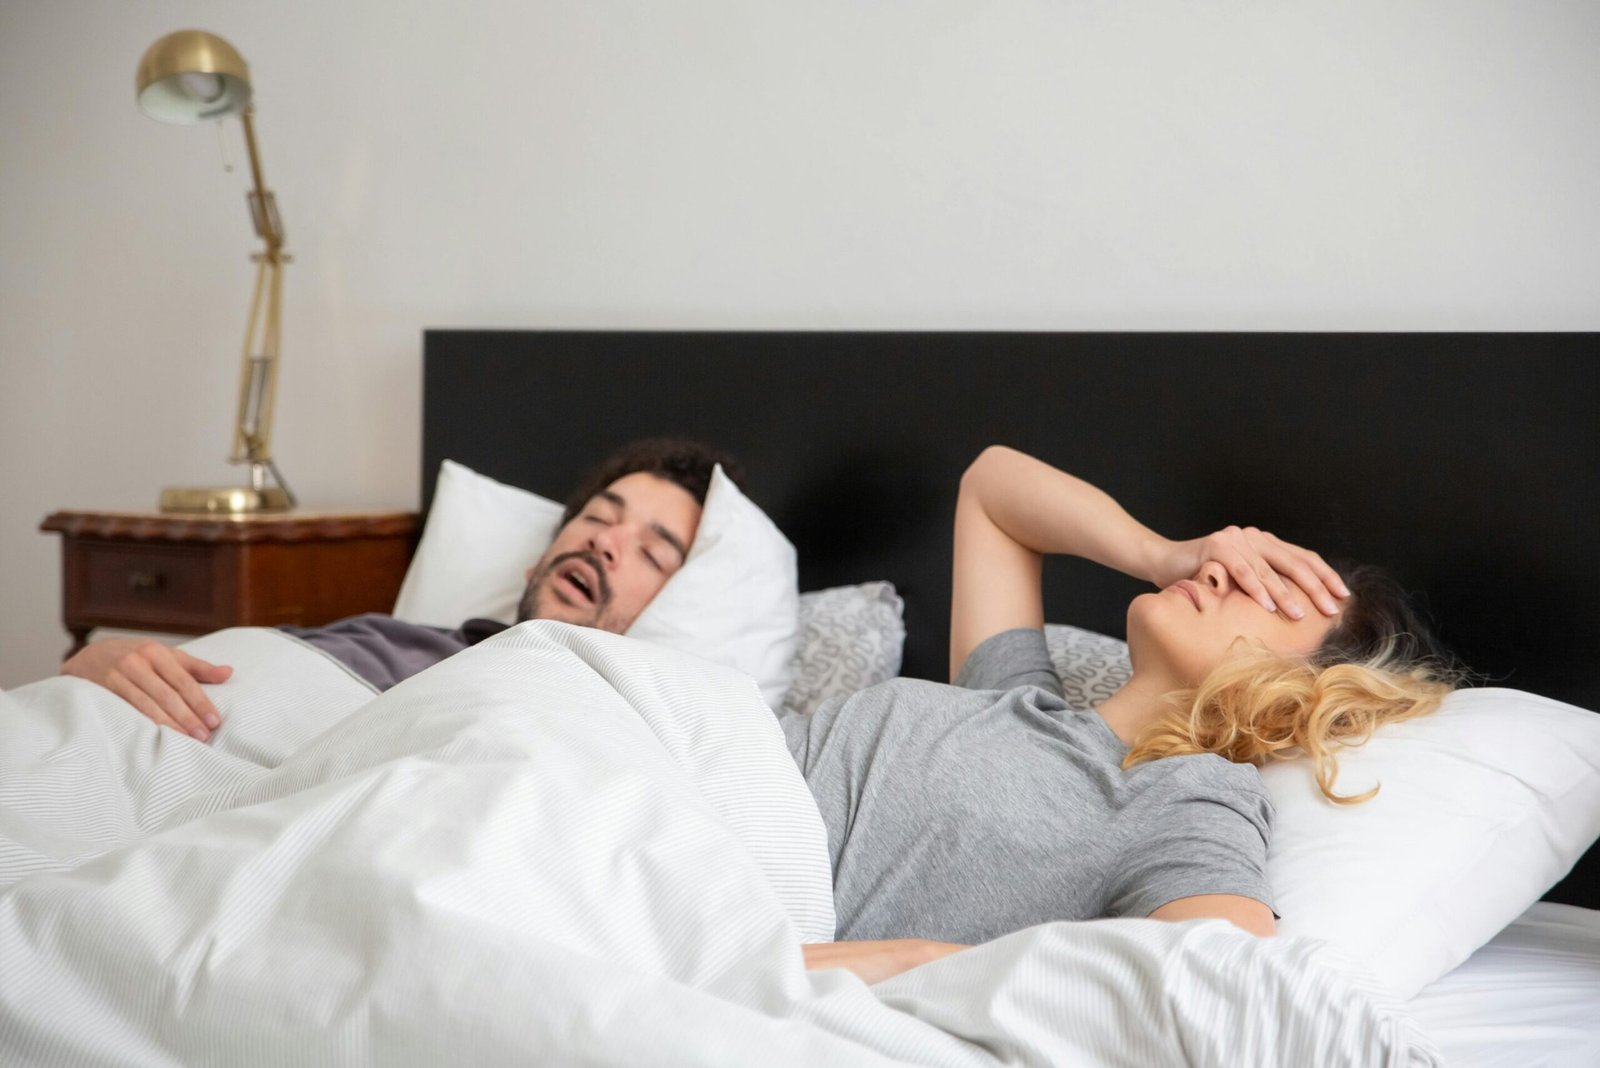 Does how loud you snore matter to your health